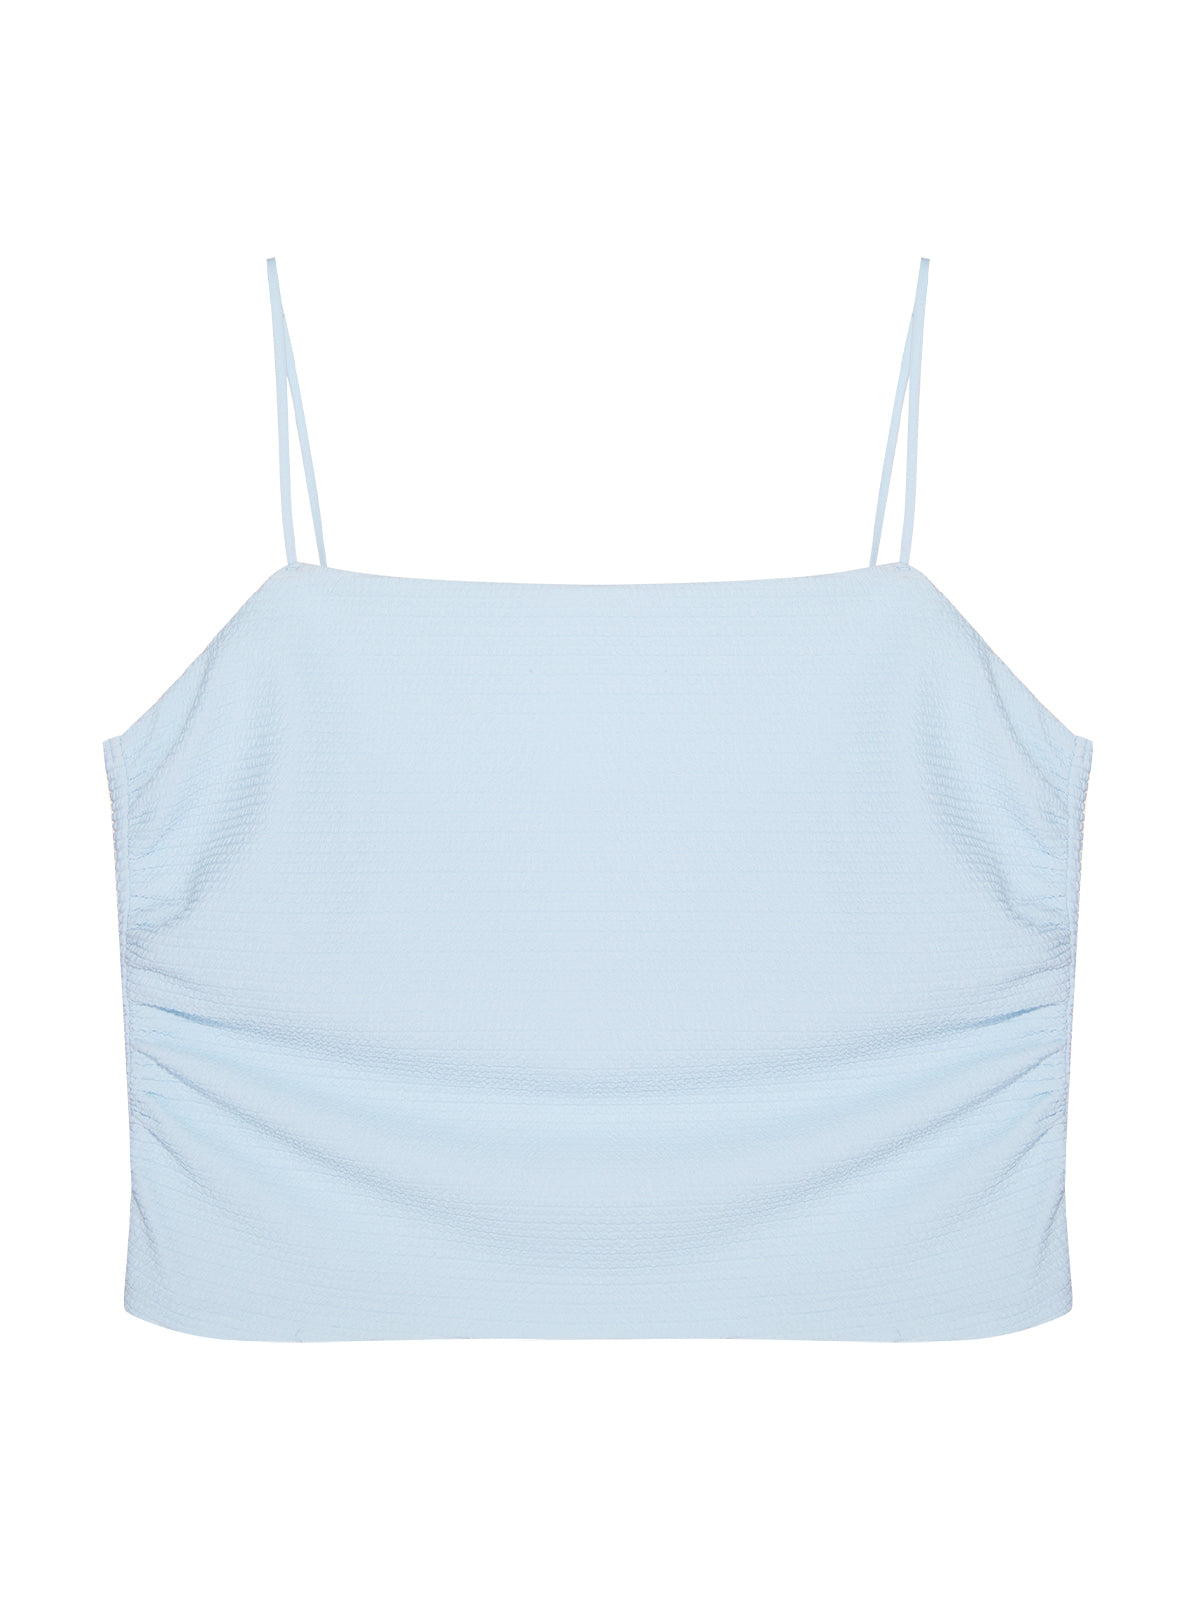 Textured Ruched Camisole